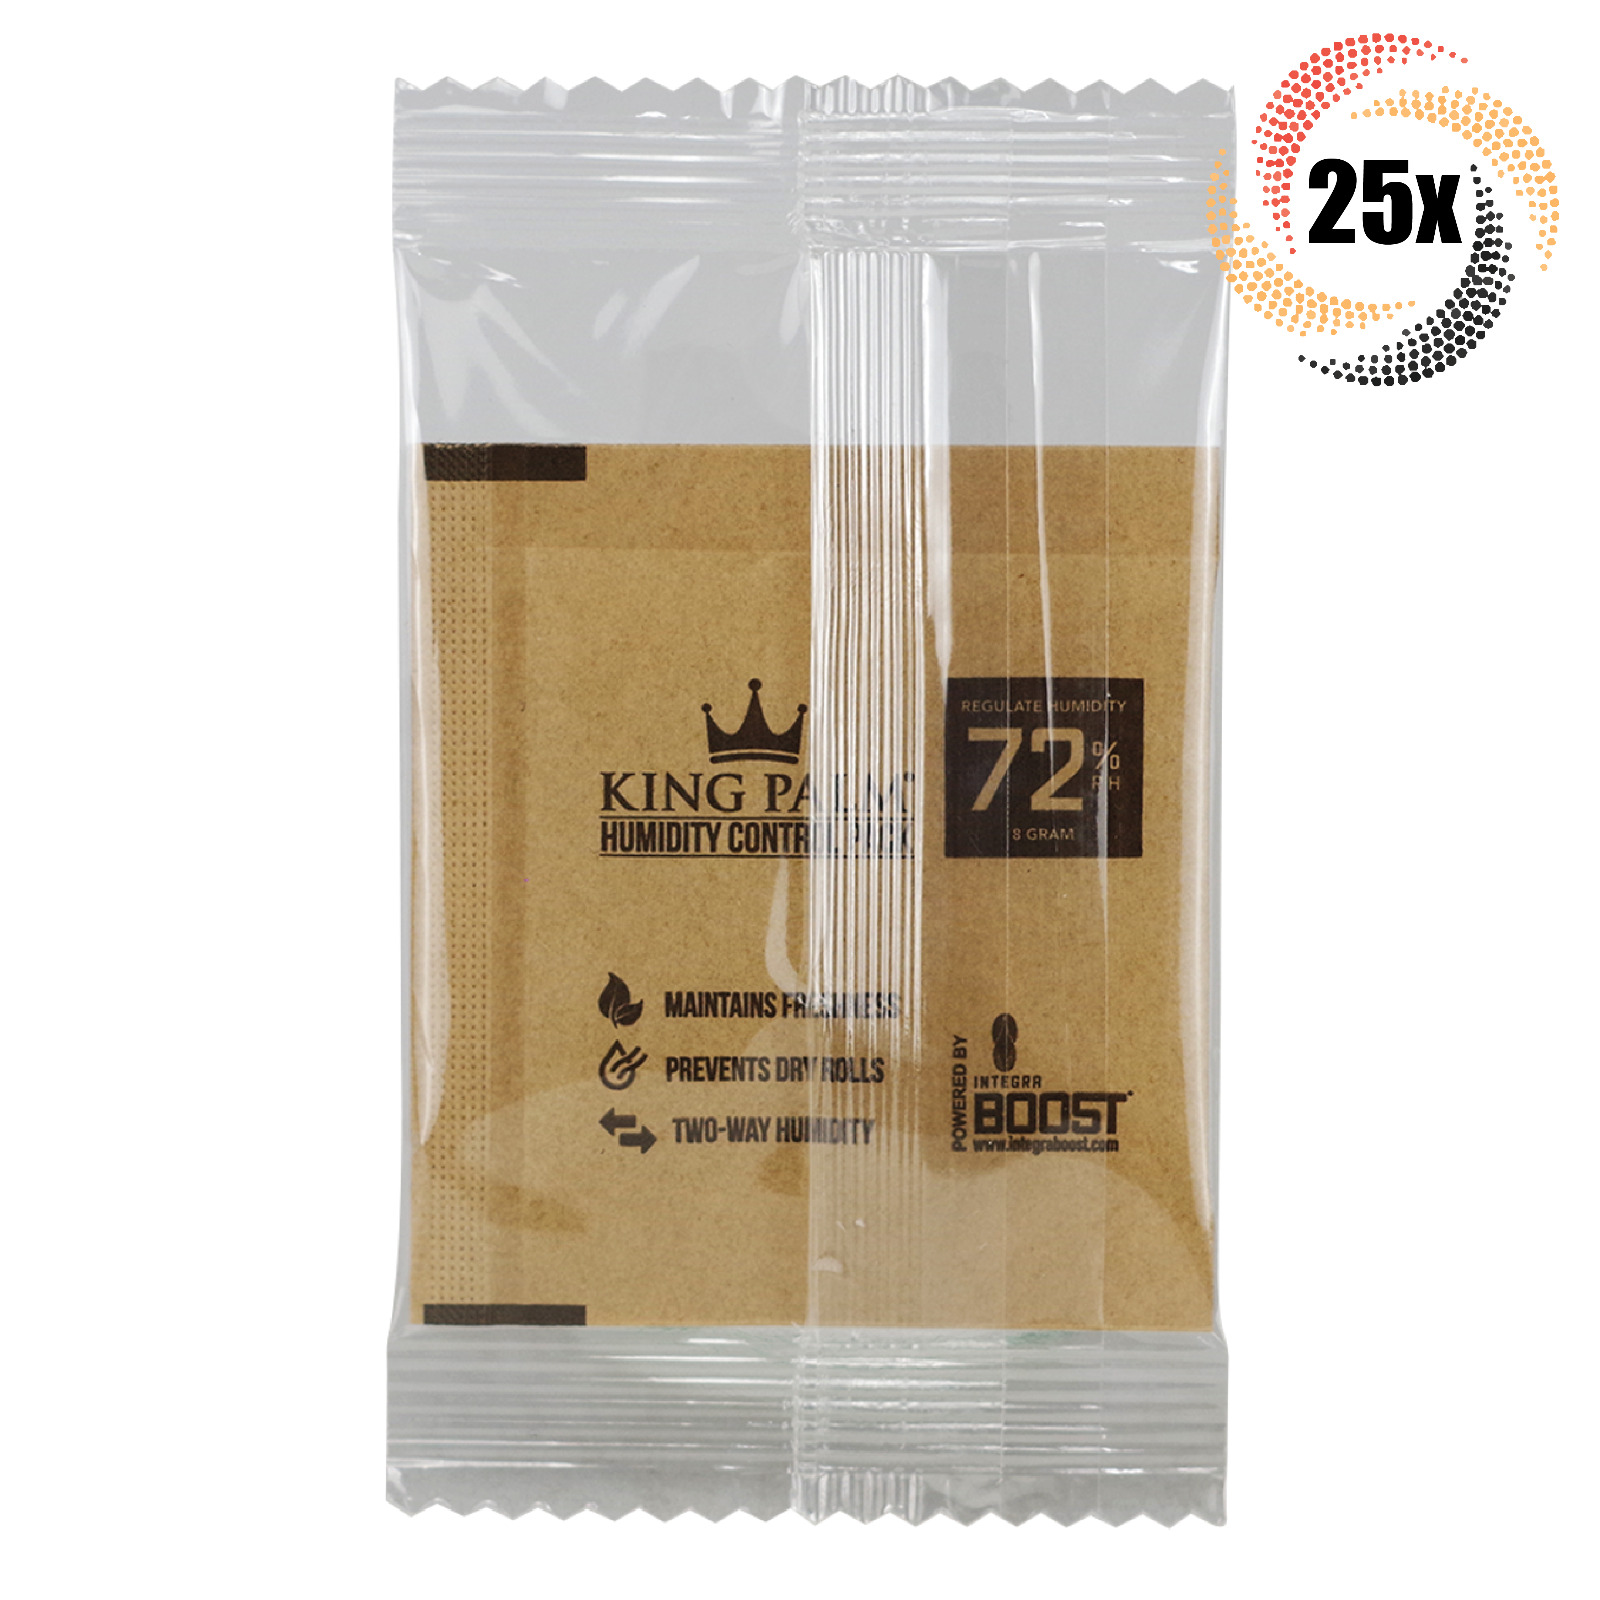 25x Packs King Palm 72% 8 Gram Natural Humidity Control | Fast Shipping